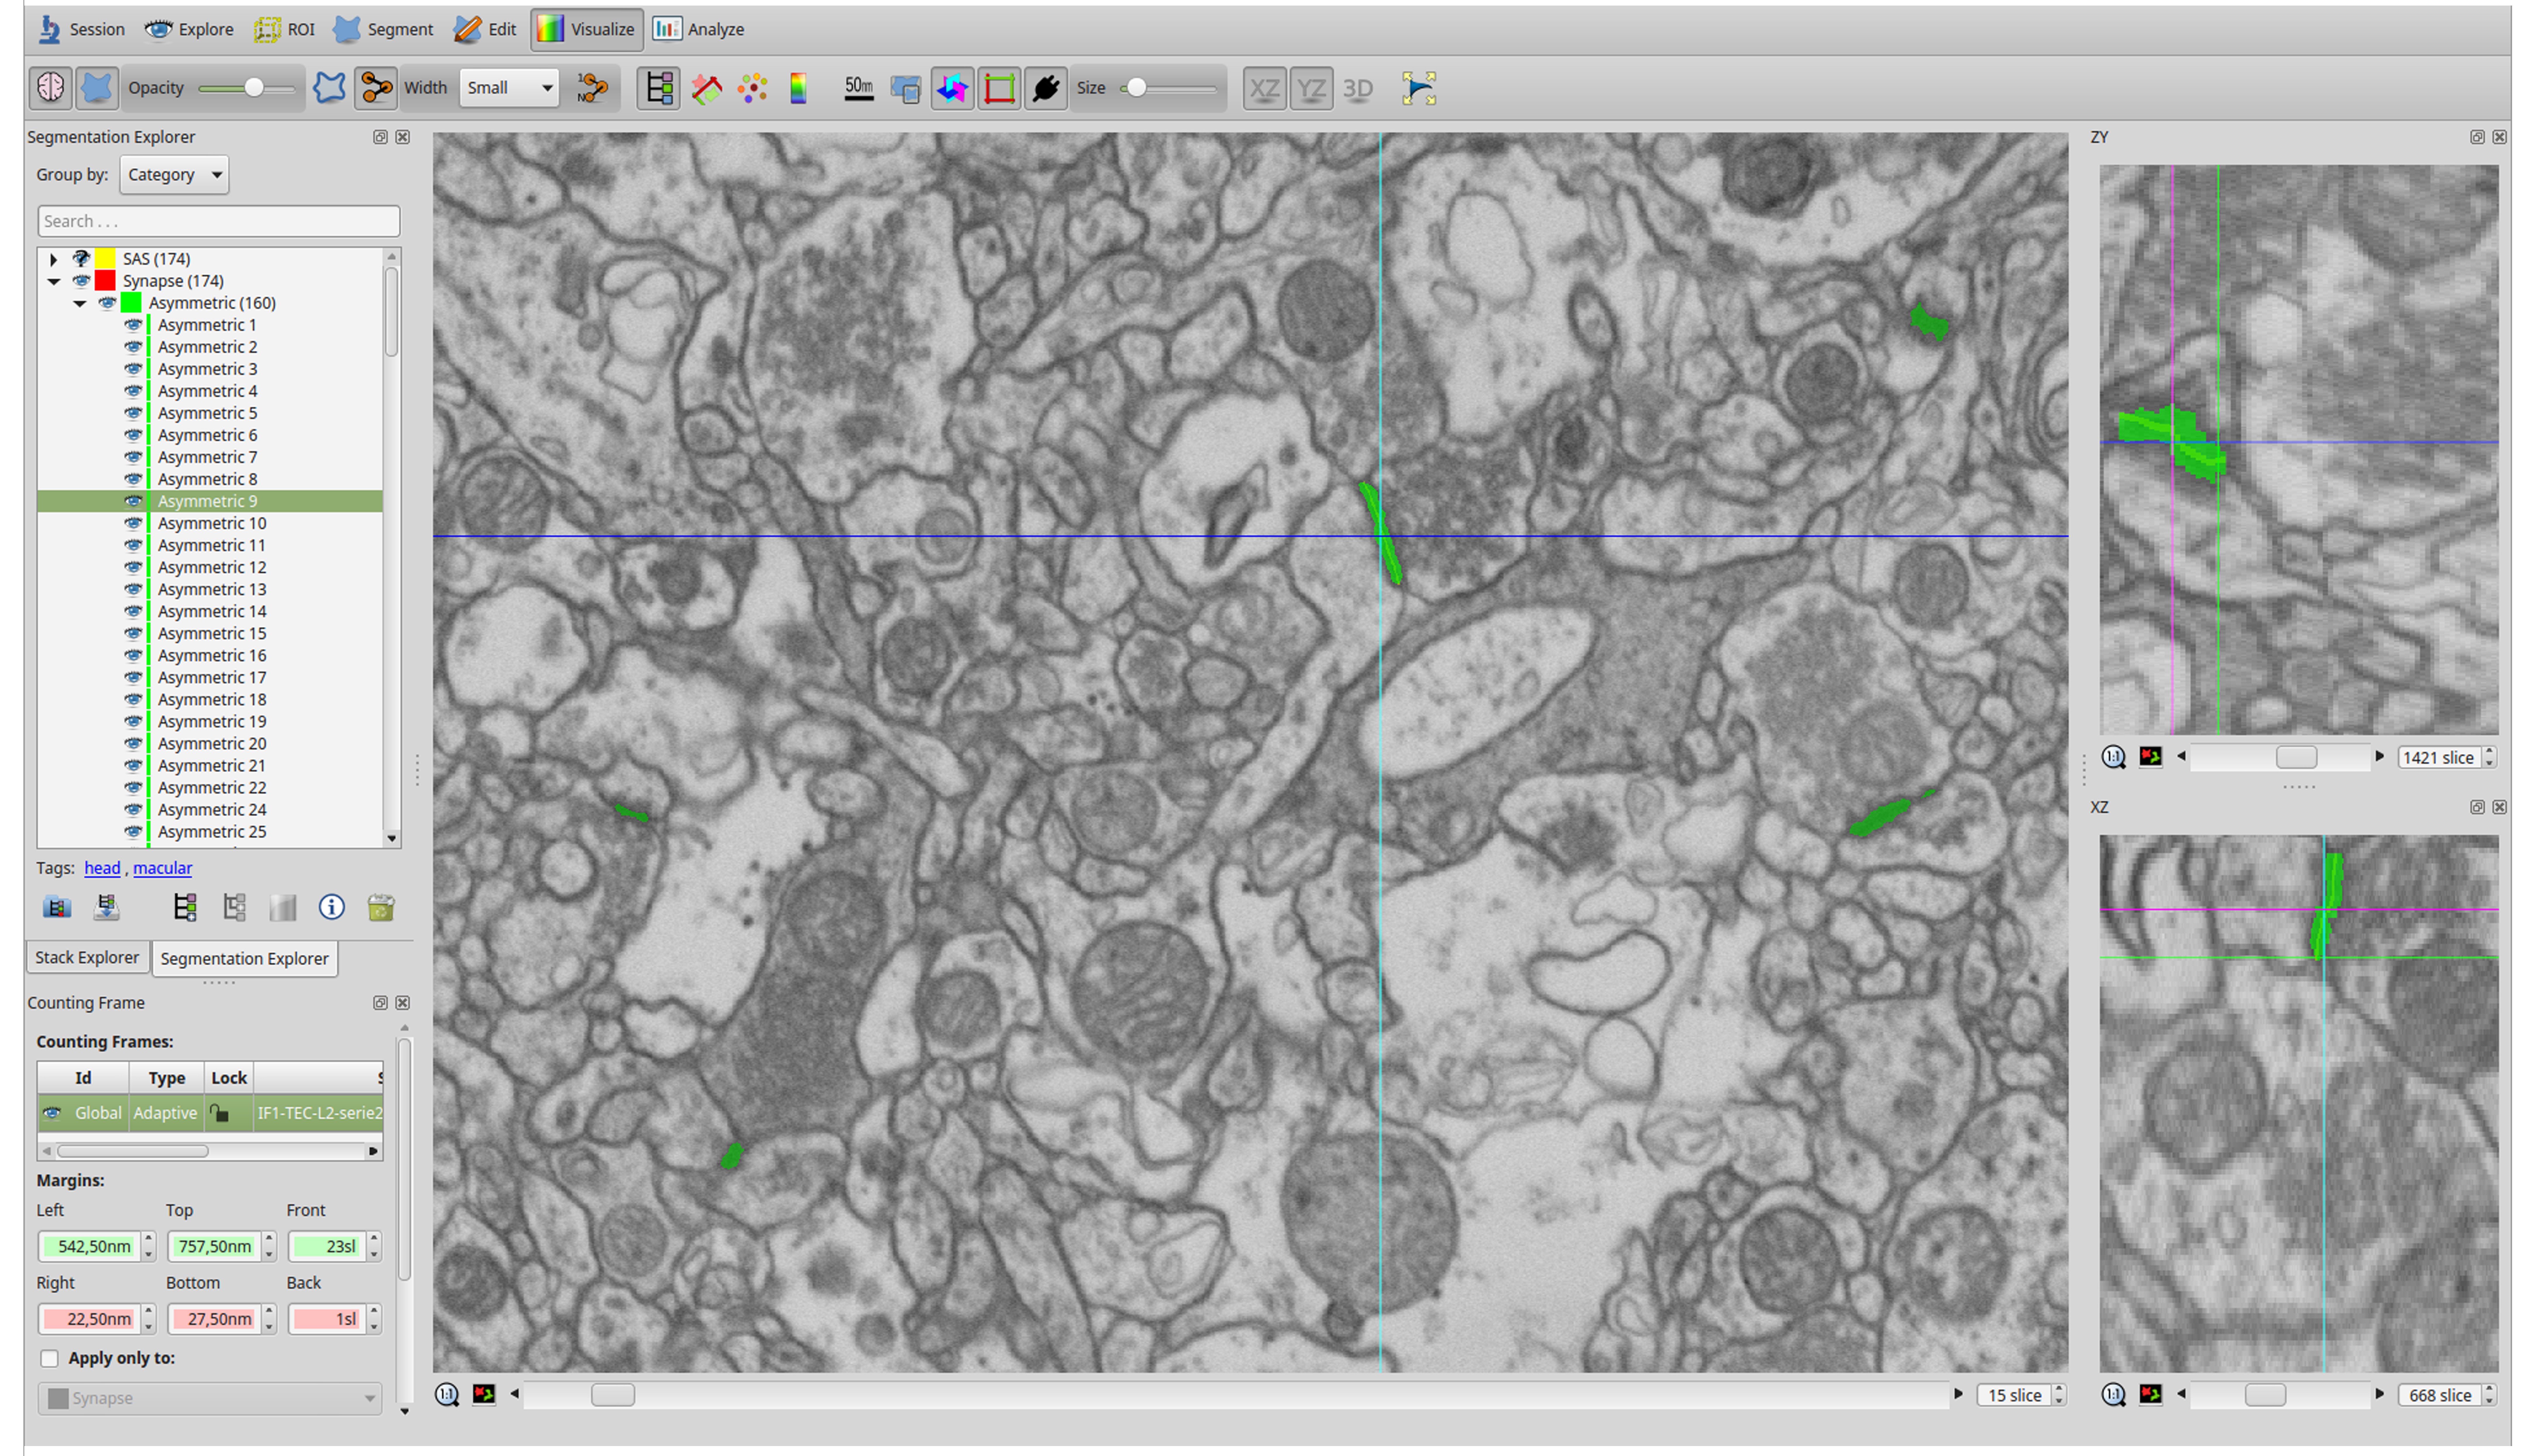 Screenshot of the software user interface (EspINA). In the main window, the sections are viewed through the xy plane (as obtained by FIB/SEM microscopy). The other two orthogonal planes, yz and xz, are also shown in adjacent windows (on the right). The list of identified synapses is shown on the left. Synapses are colored in green. (From Figure 3 of Dominguez-Álvaro et al. 2019, eNeuro).